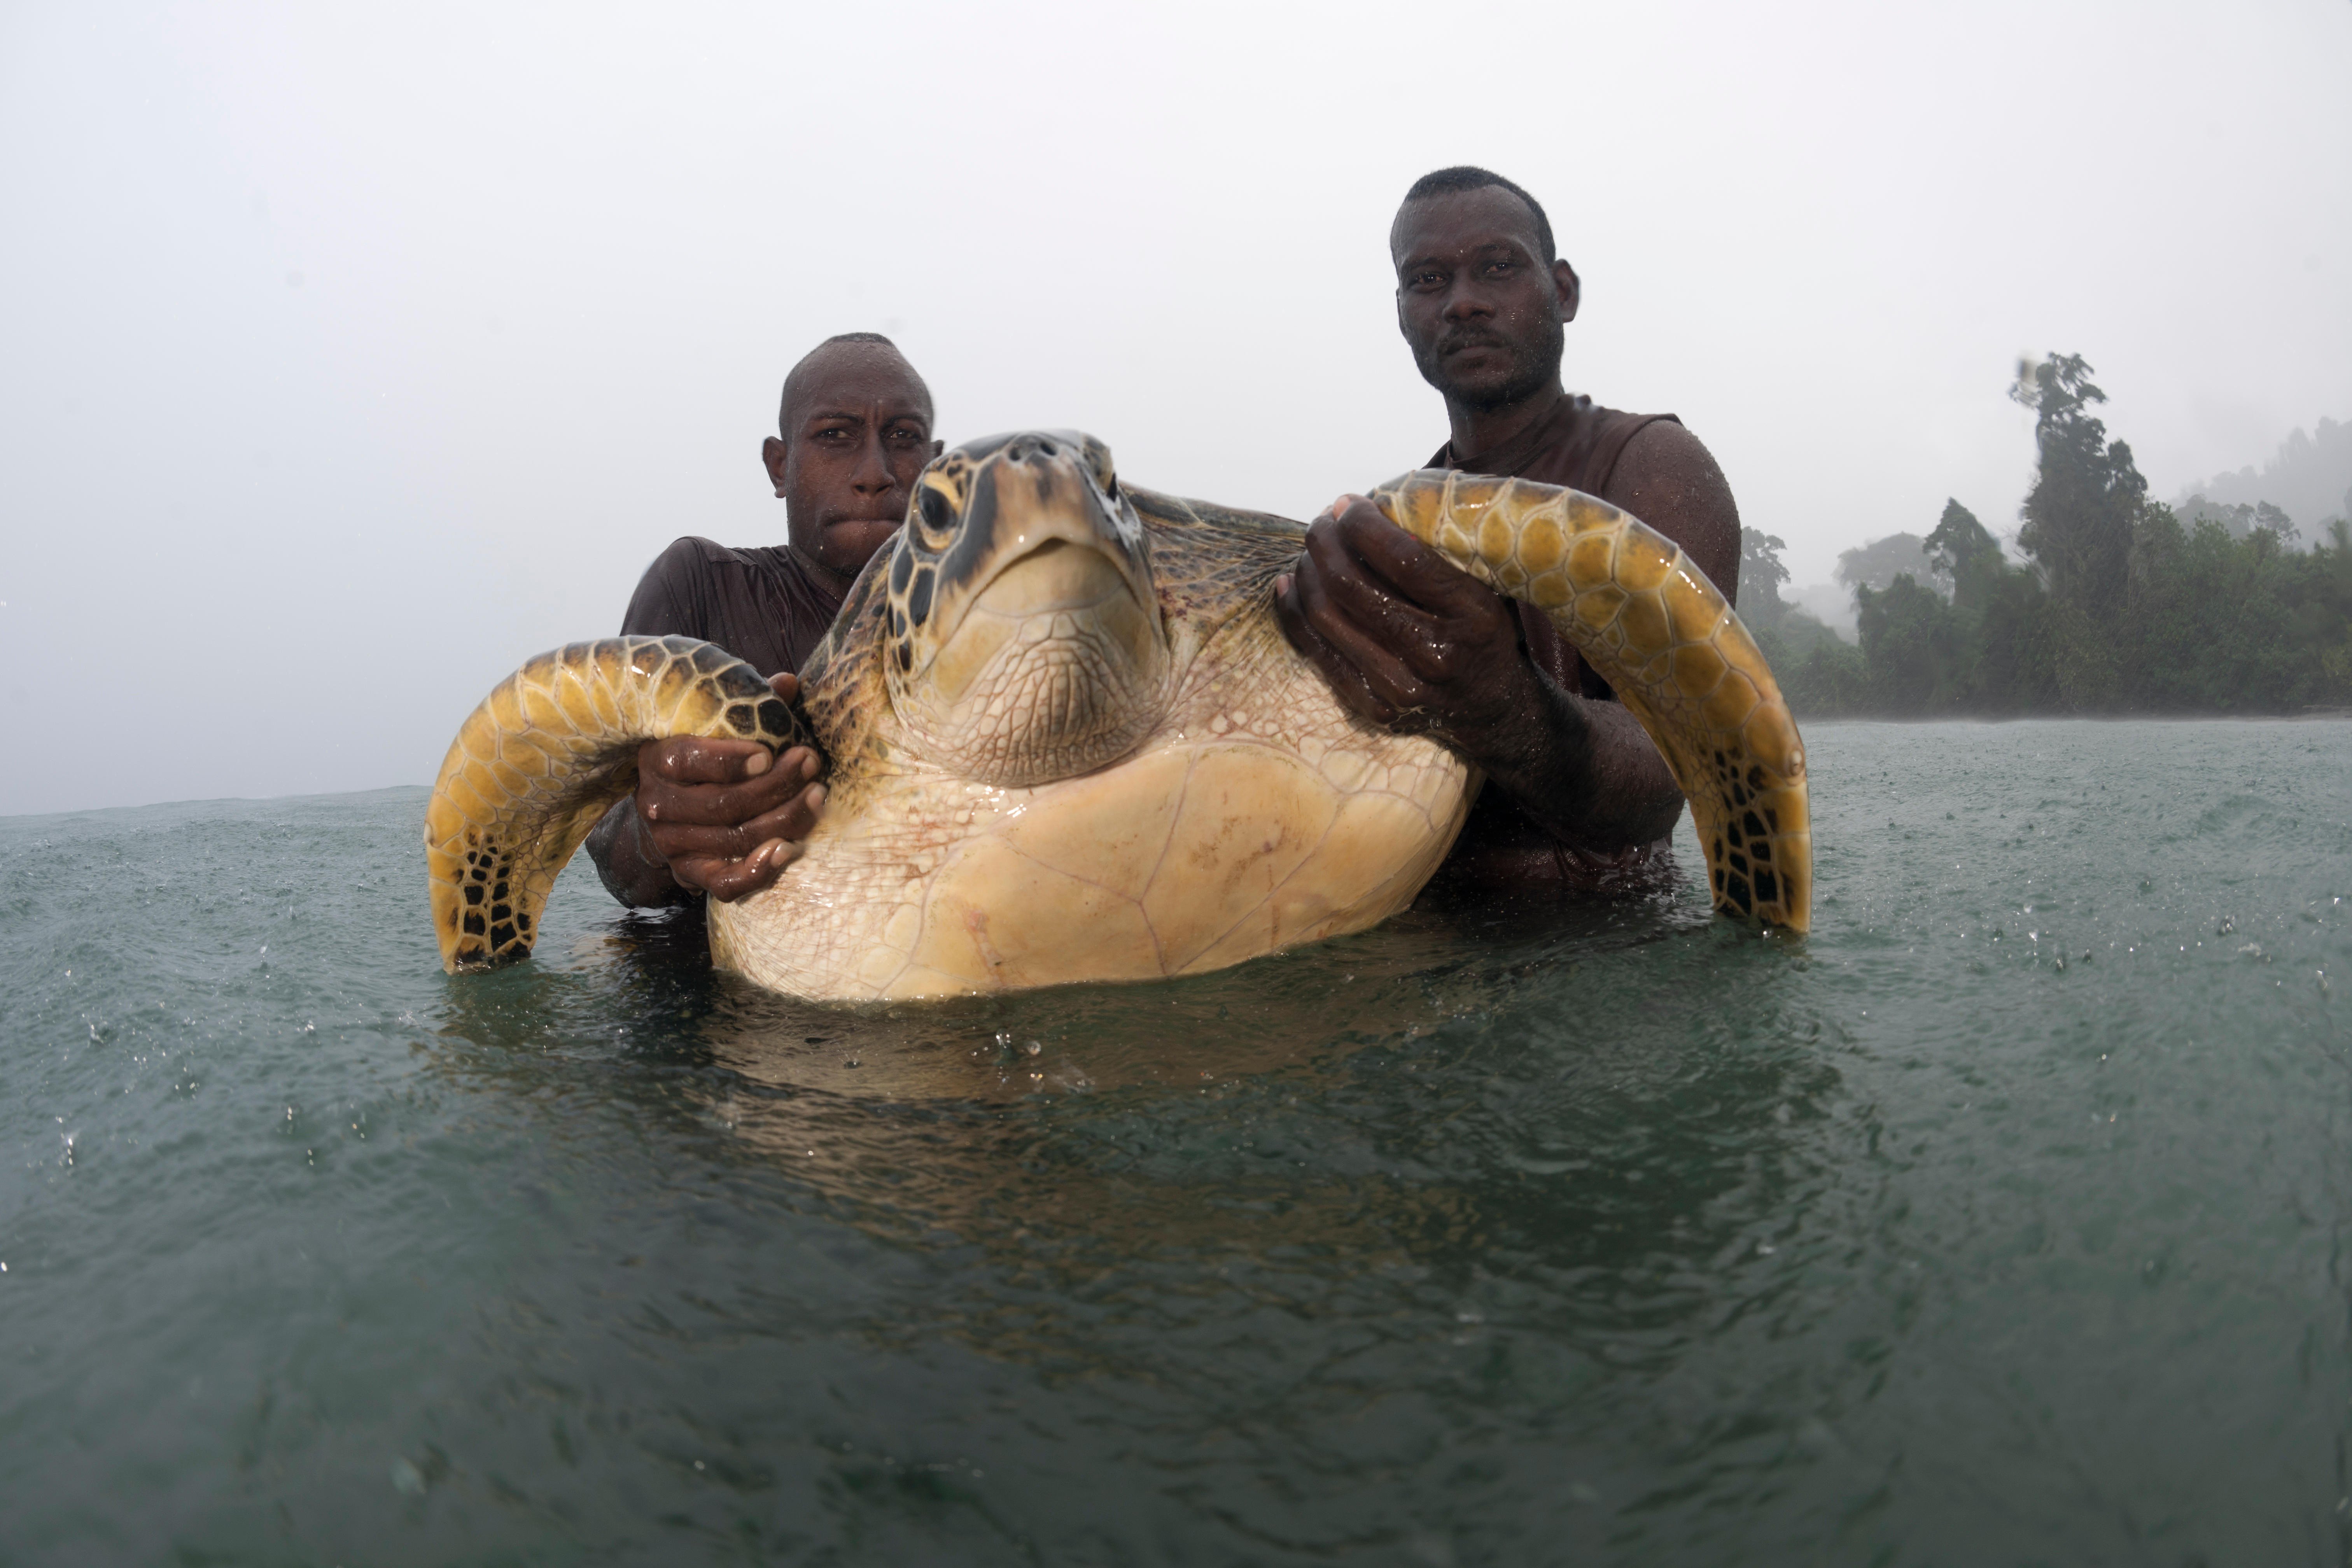 Rangers catch a green turtle for tagging off Tetepare Island, Solomon Islands. Photo: Alamy